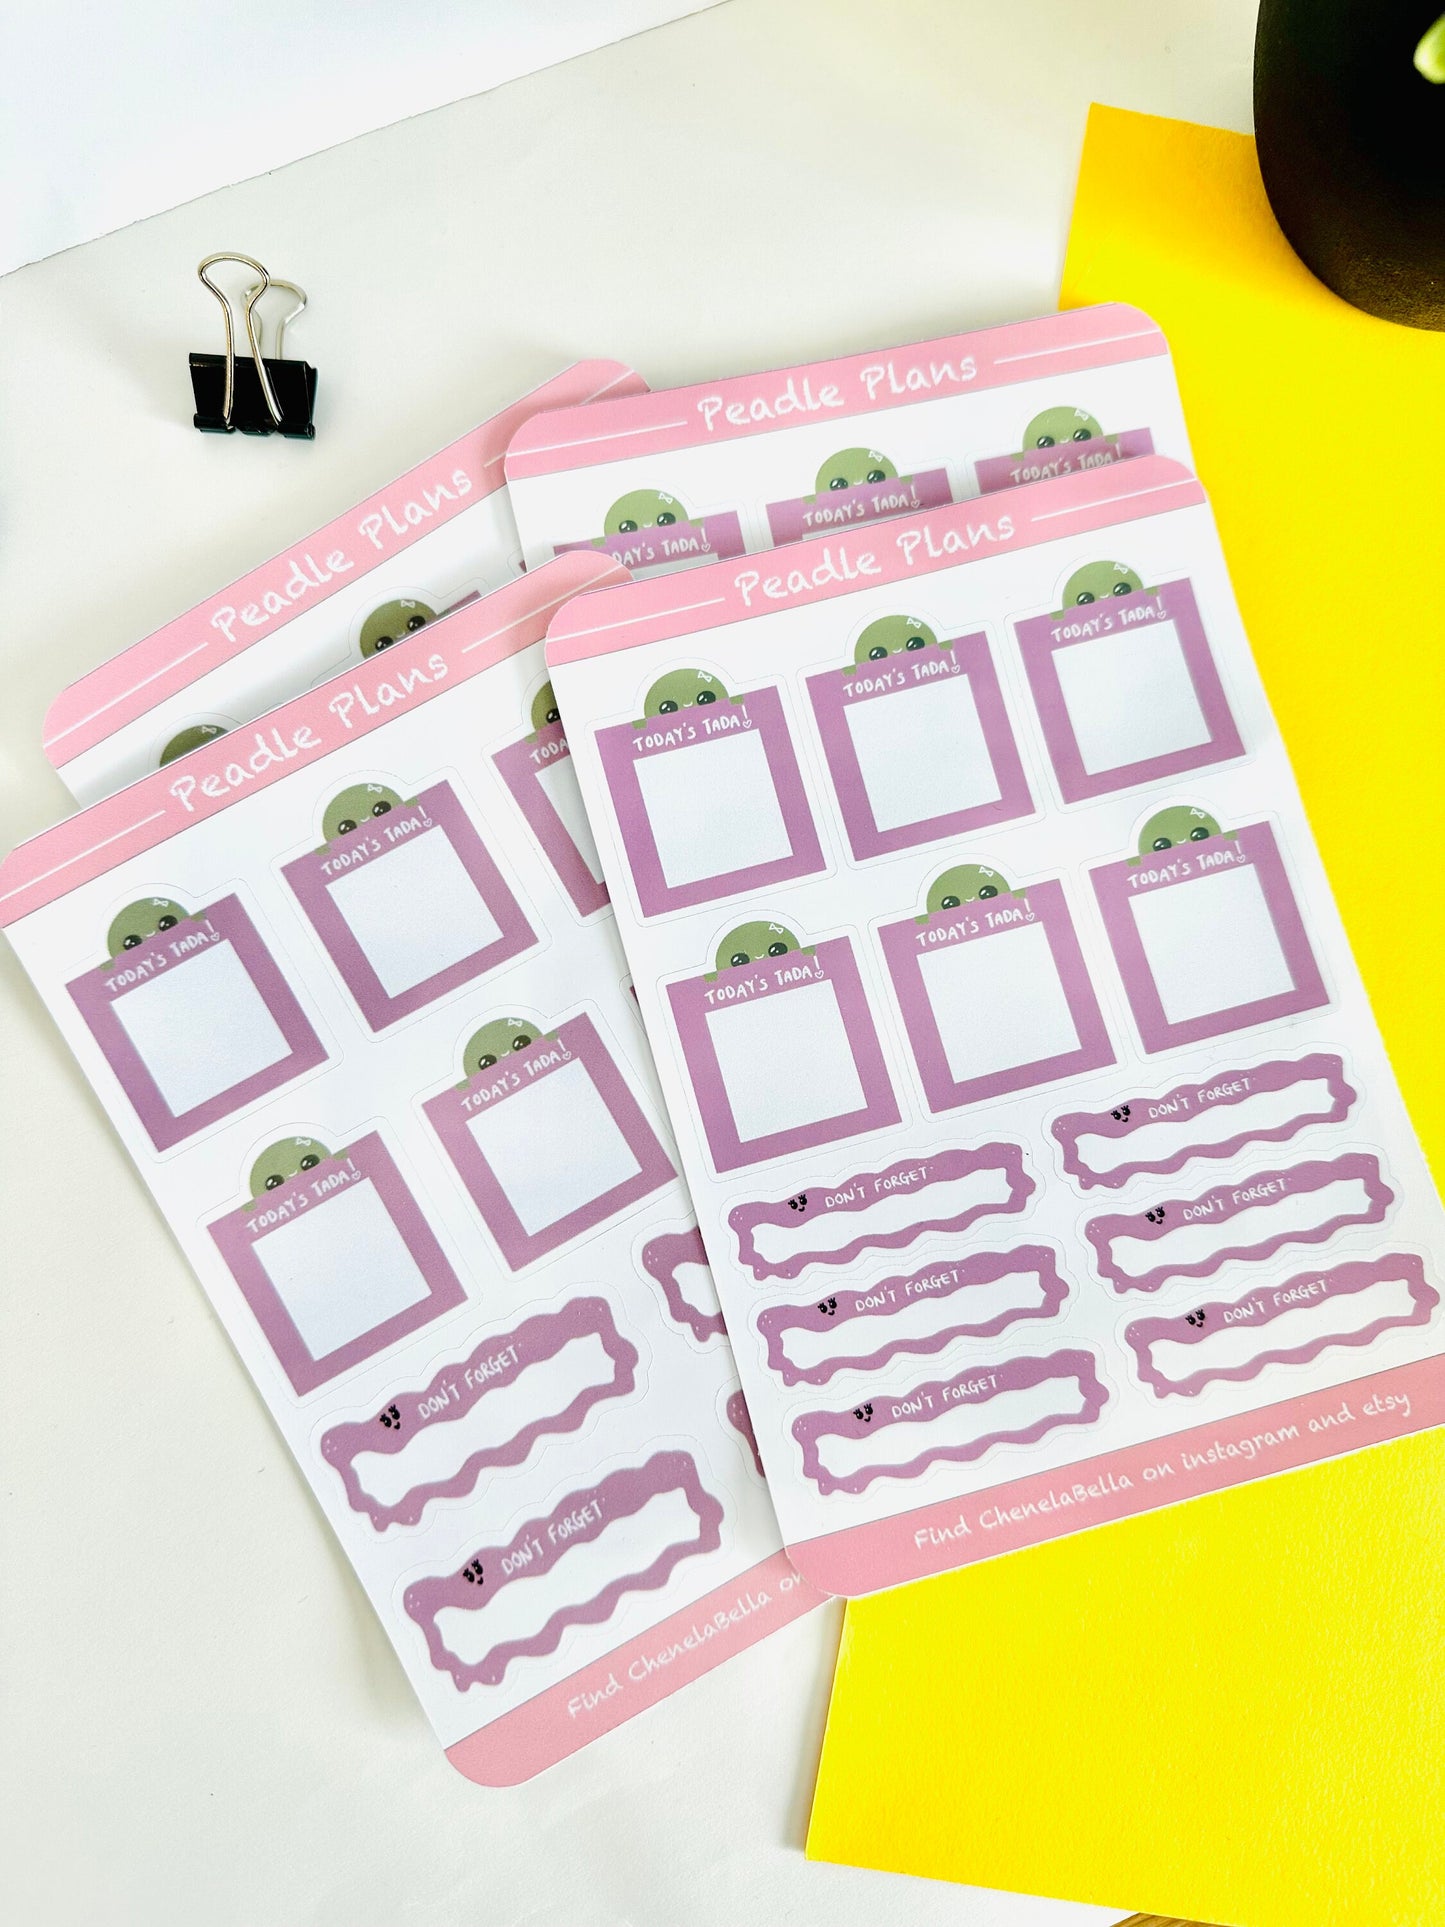 Planner sticker sheet close up in a group